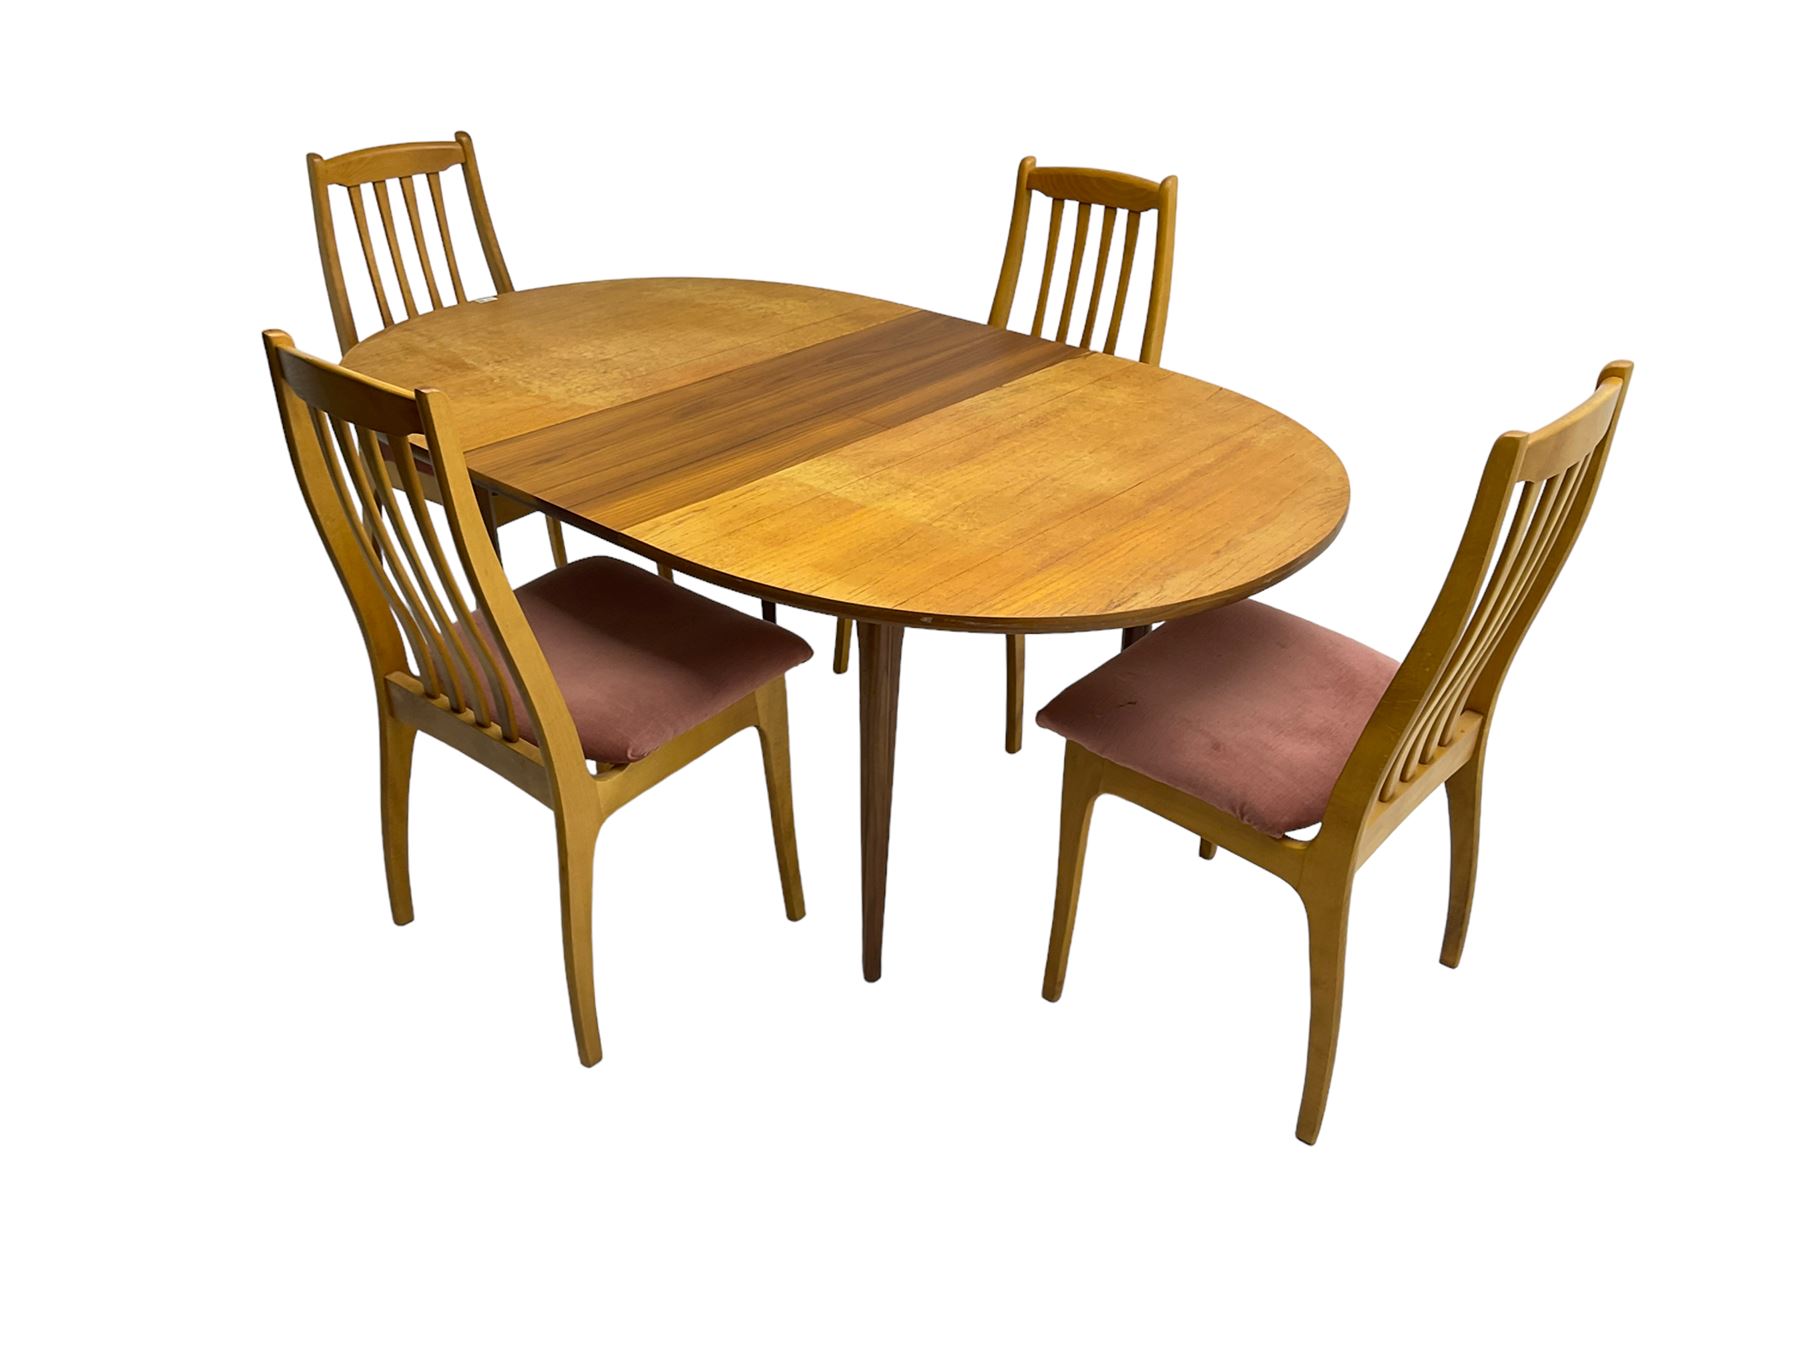 Portwood Furniture - mid-20th century teak extending dining table - Image 3 of 6